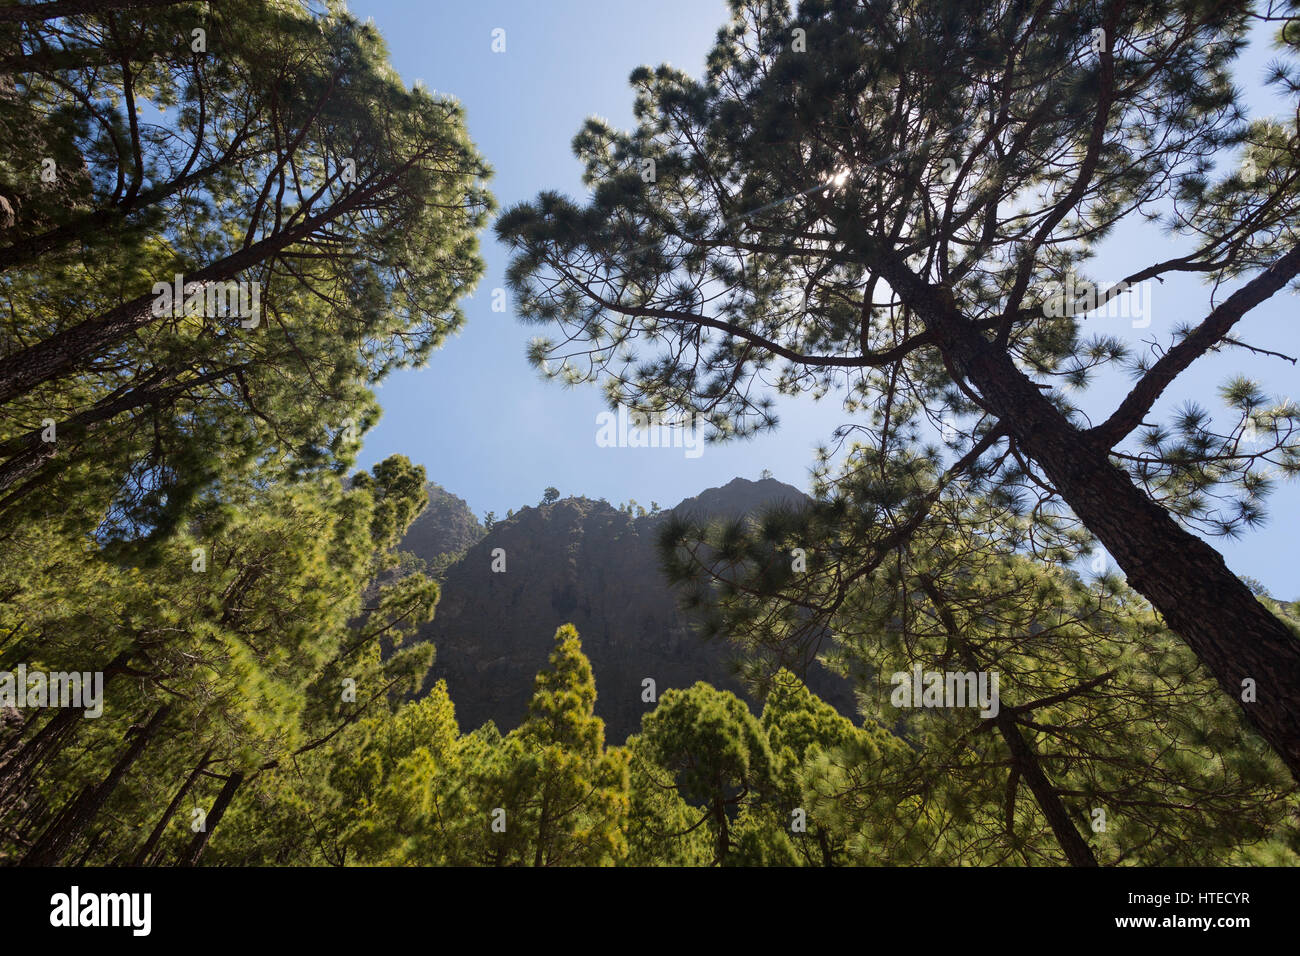 Bottom view of a Pine Tree forest - Pinus canariensis - in the Caldera de Taburiente National Park on the Canary island of La Palma in Spain, Europe. Stock Photo